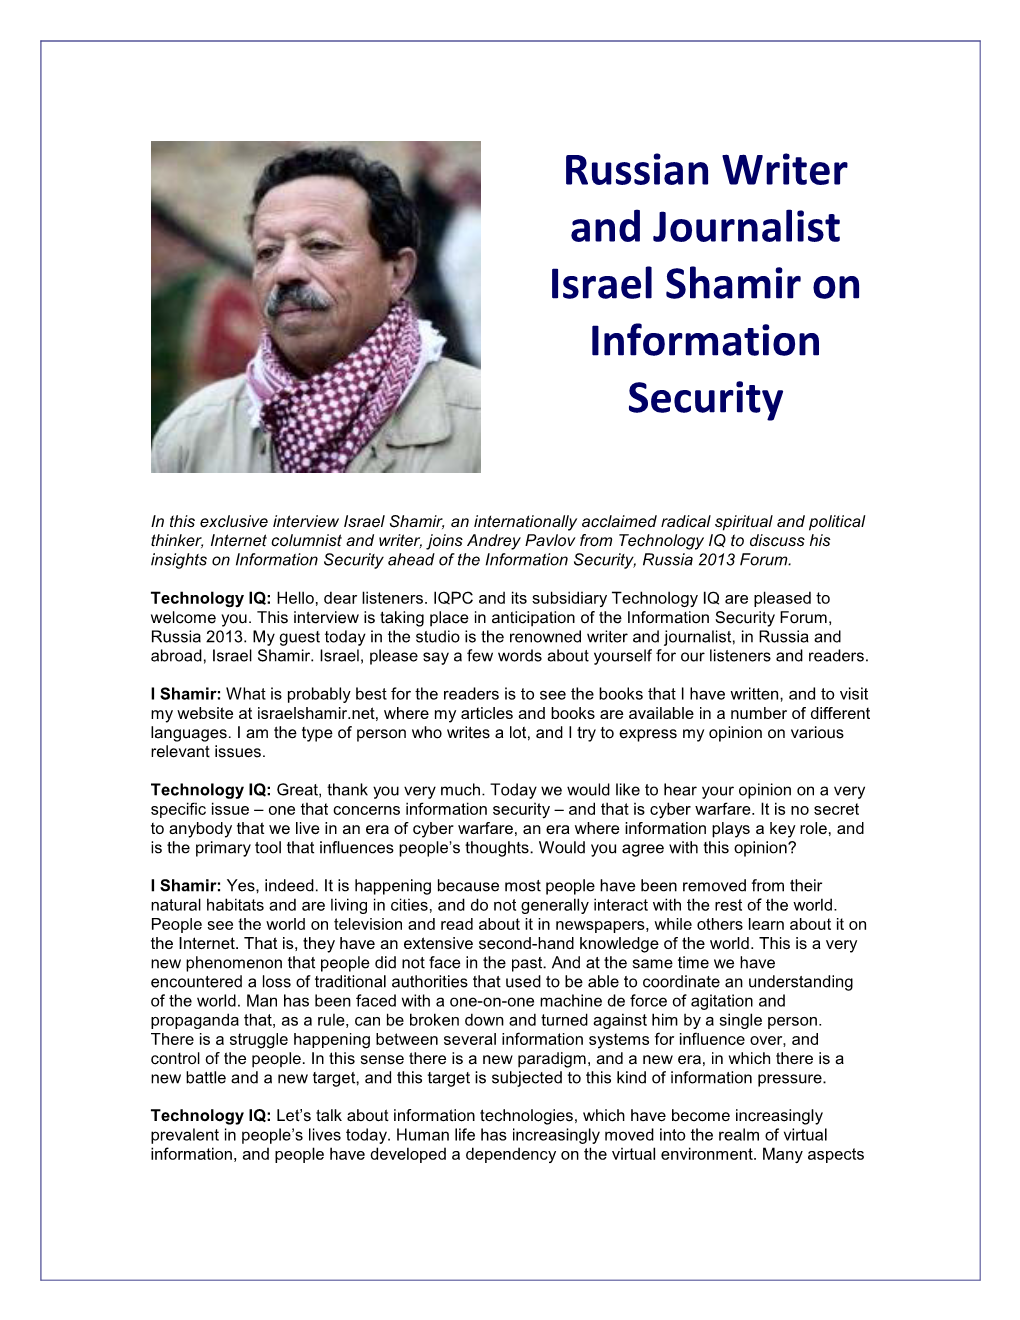 Russian Writer and Journalist Israel Shamir on Information Security